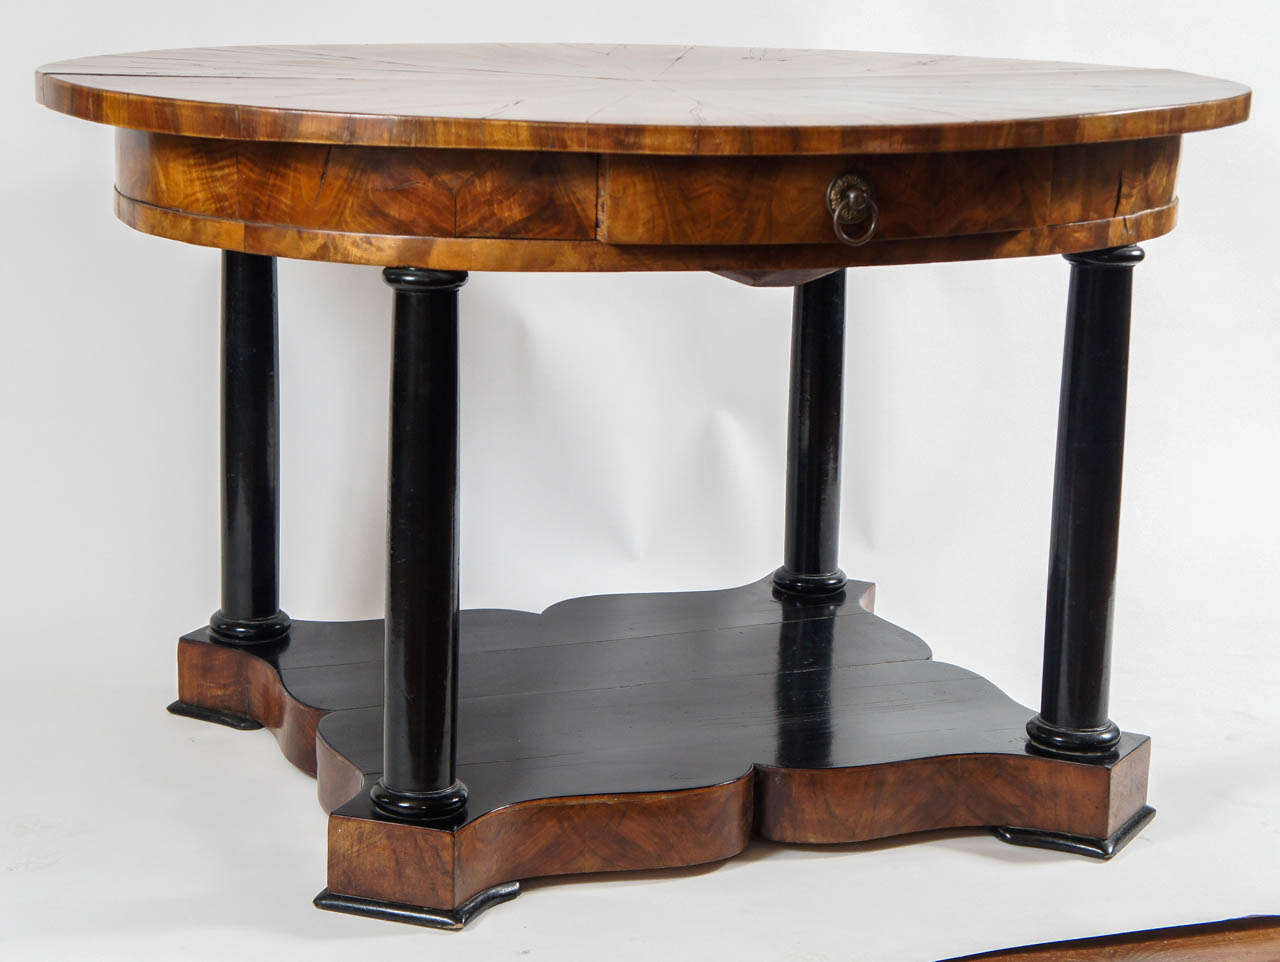 Exceptional circa 1830 Austrian Biedermeier walnut centre table of oval form having exquisite radiant pattern veneer top and single full-length centre drawer above ebonized doric colonette supports on cusped plinth base. Supreme example.